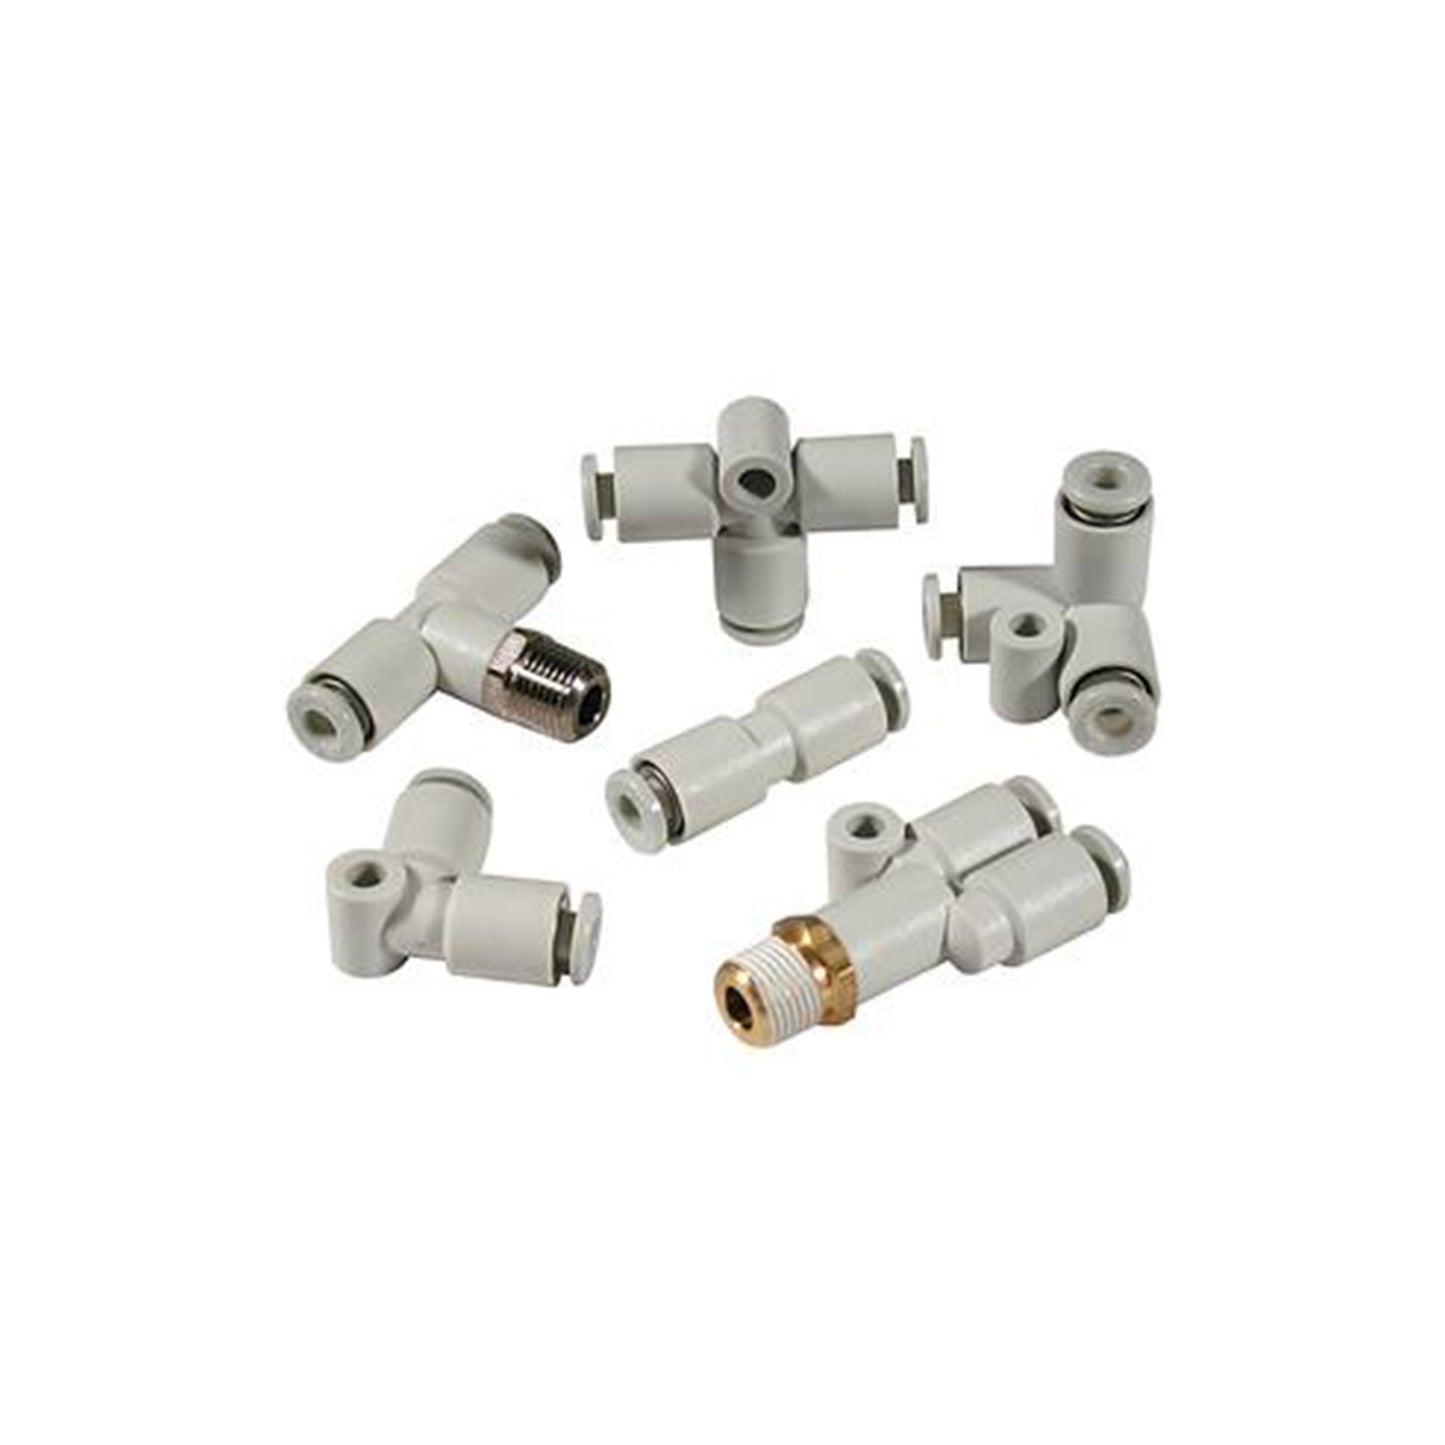 SMC KQ2H13-U02 | Unifit Male Connector Fitting